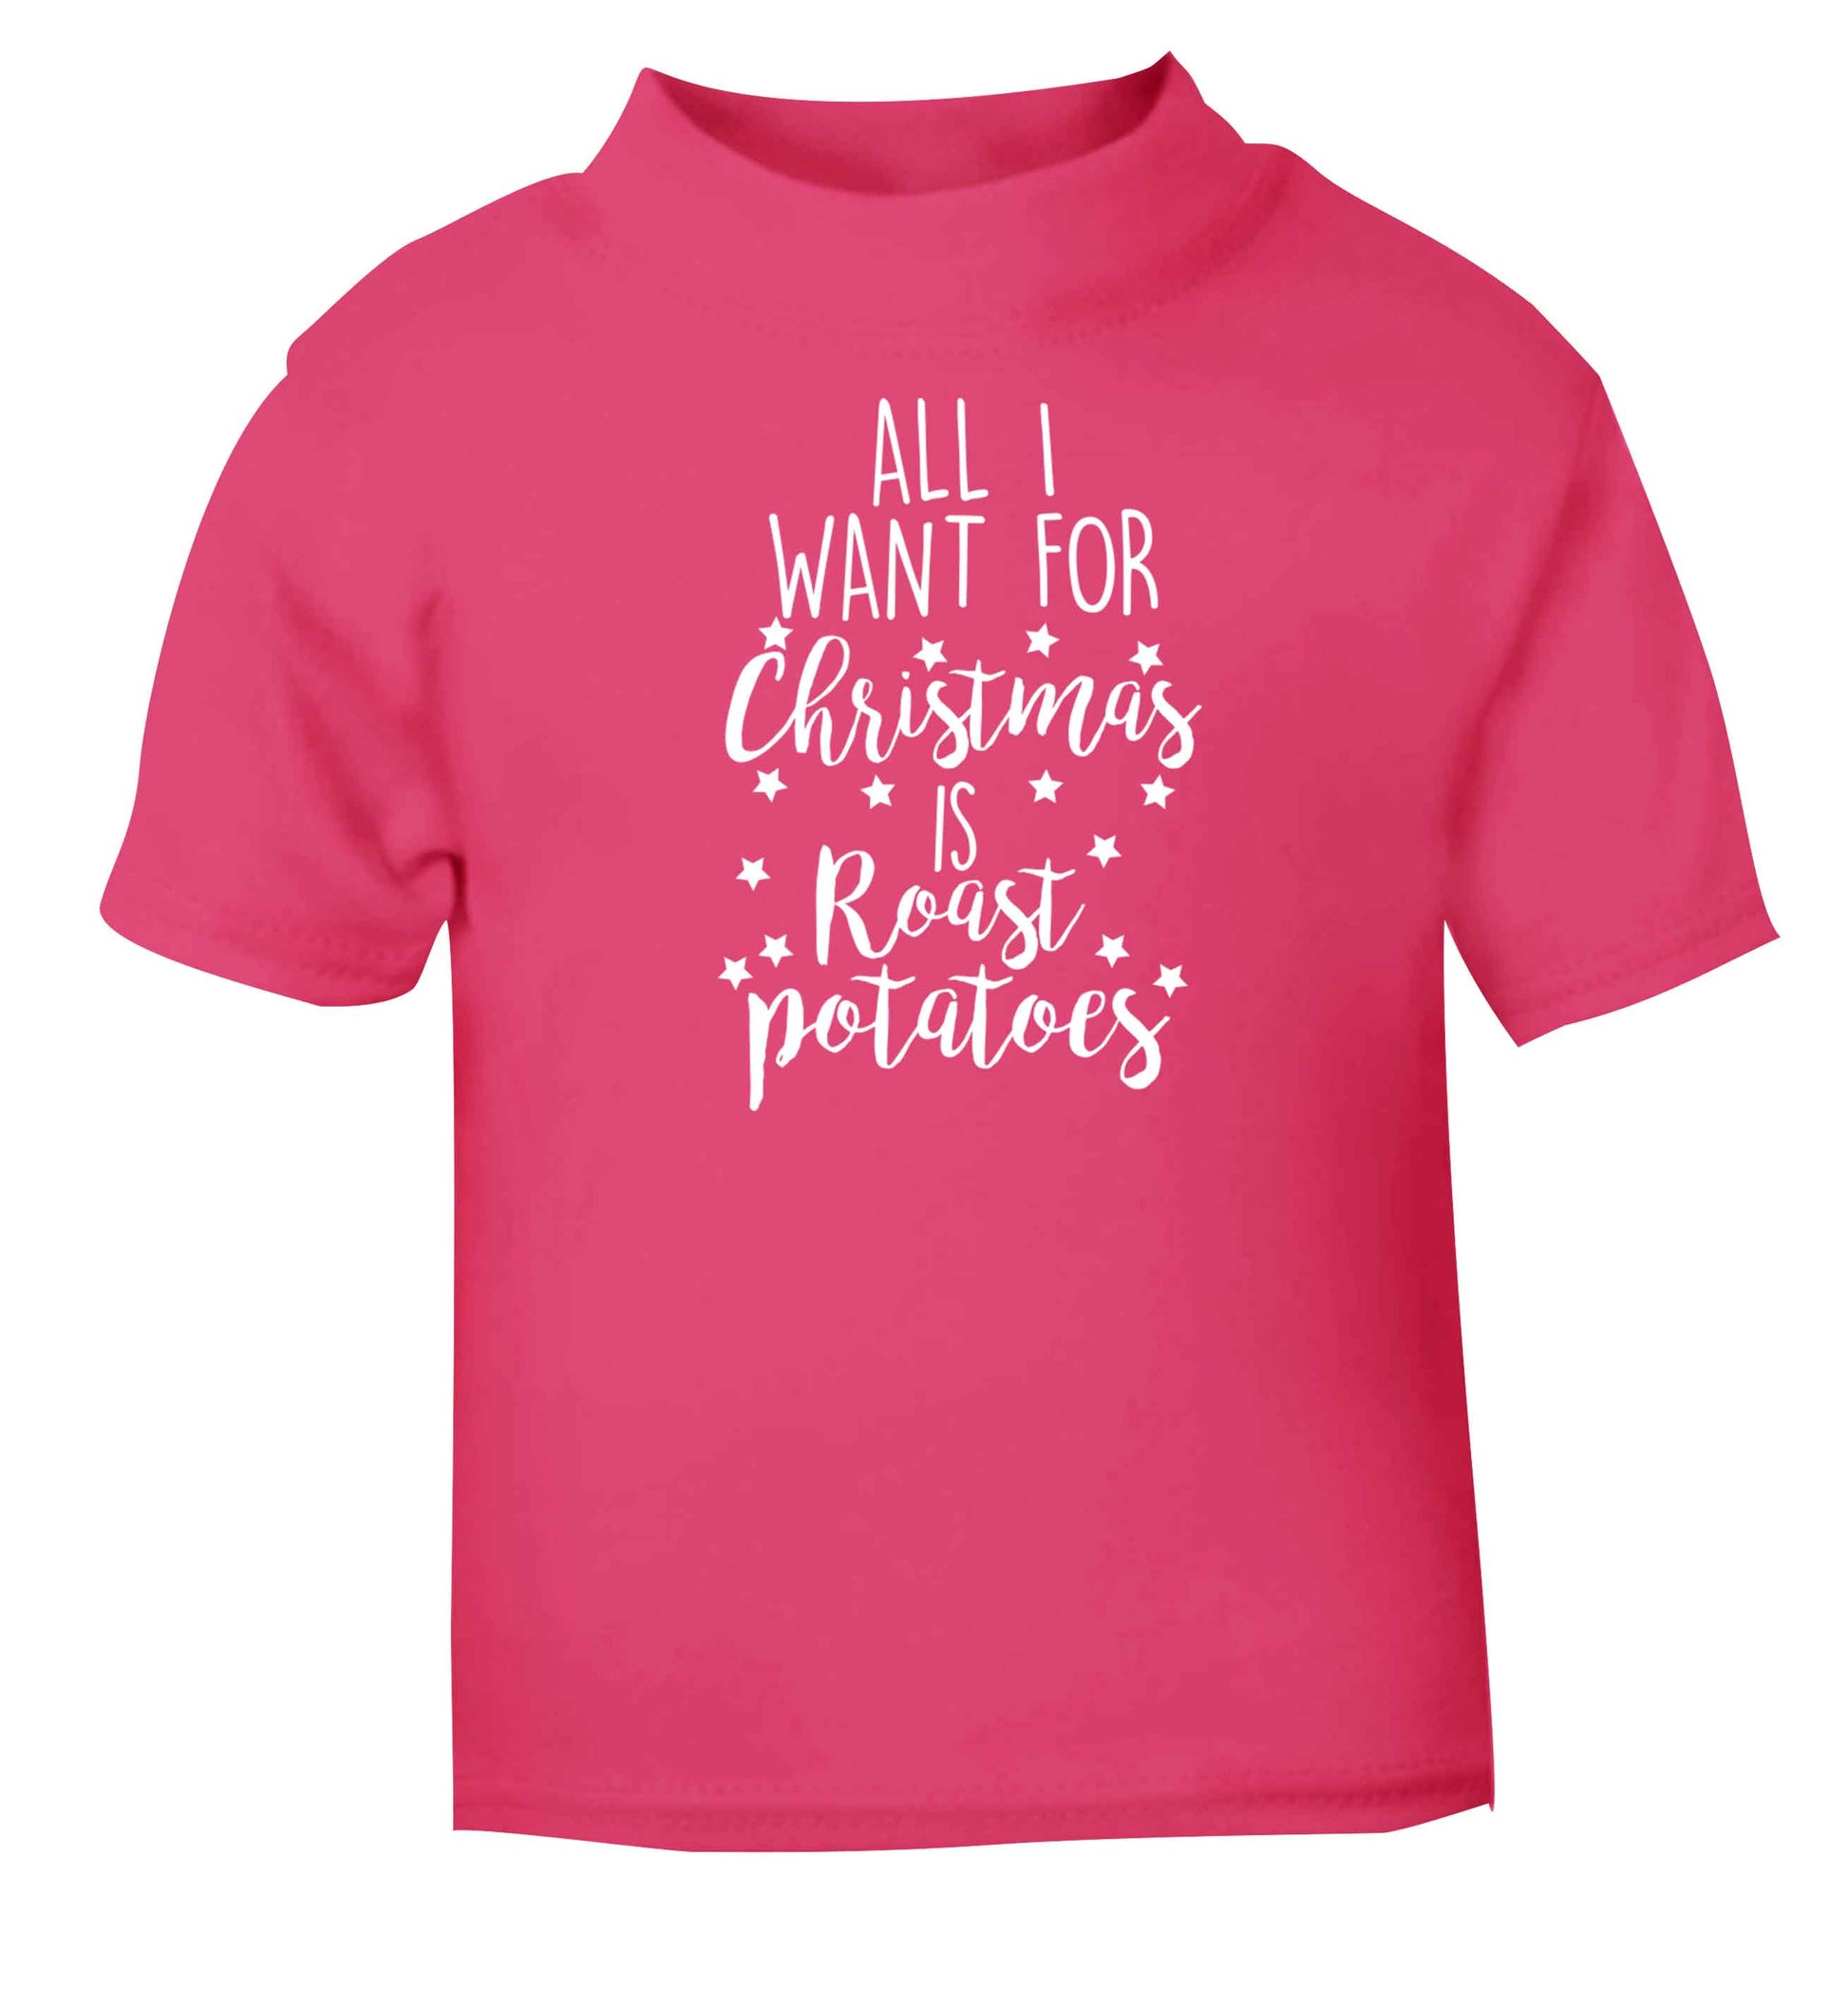 All I want for Christmas is roast potatoes pink baby toddler Tshirt 2 Years